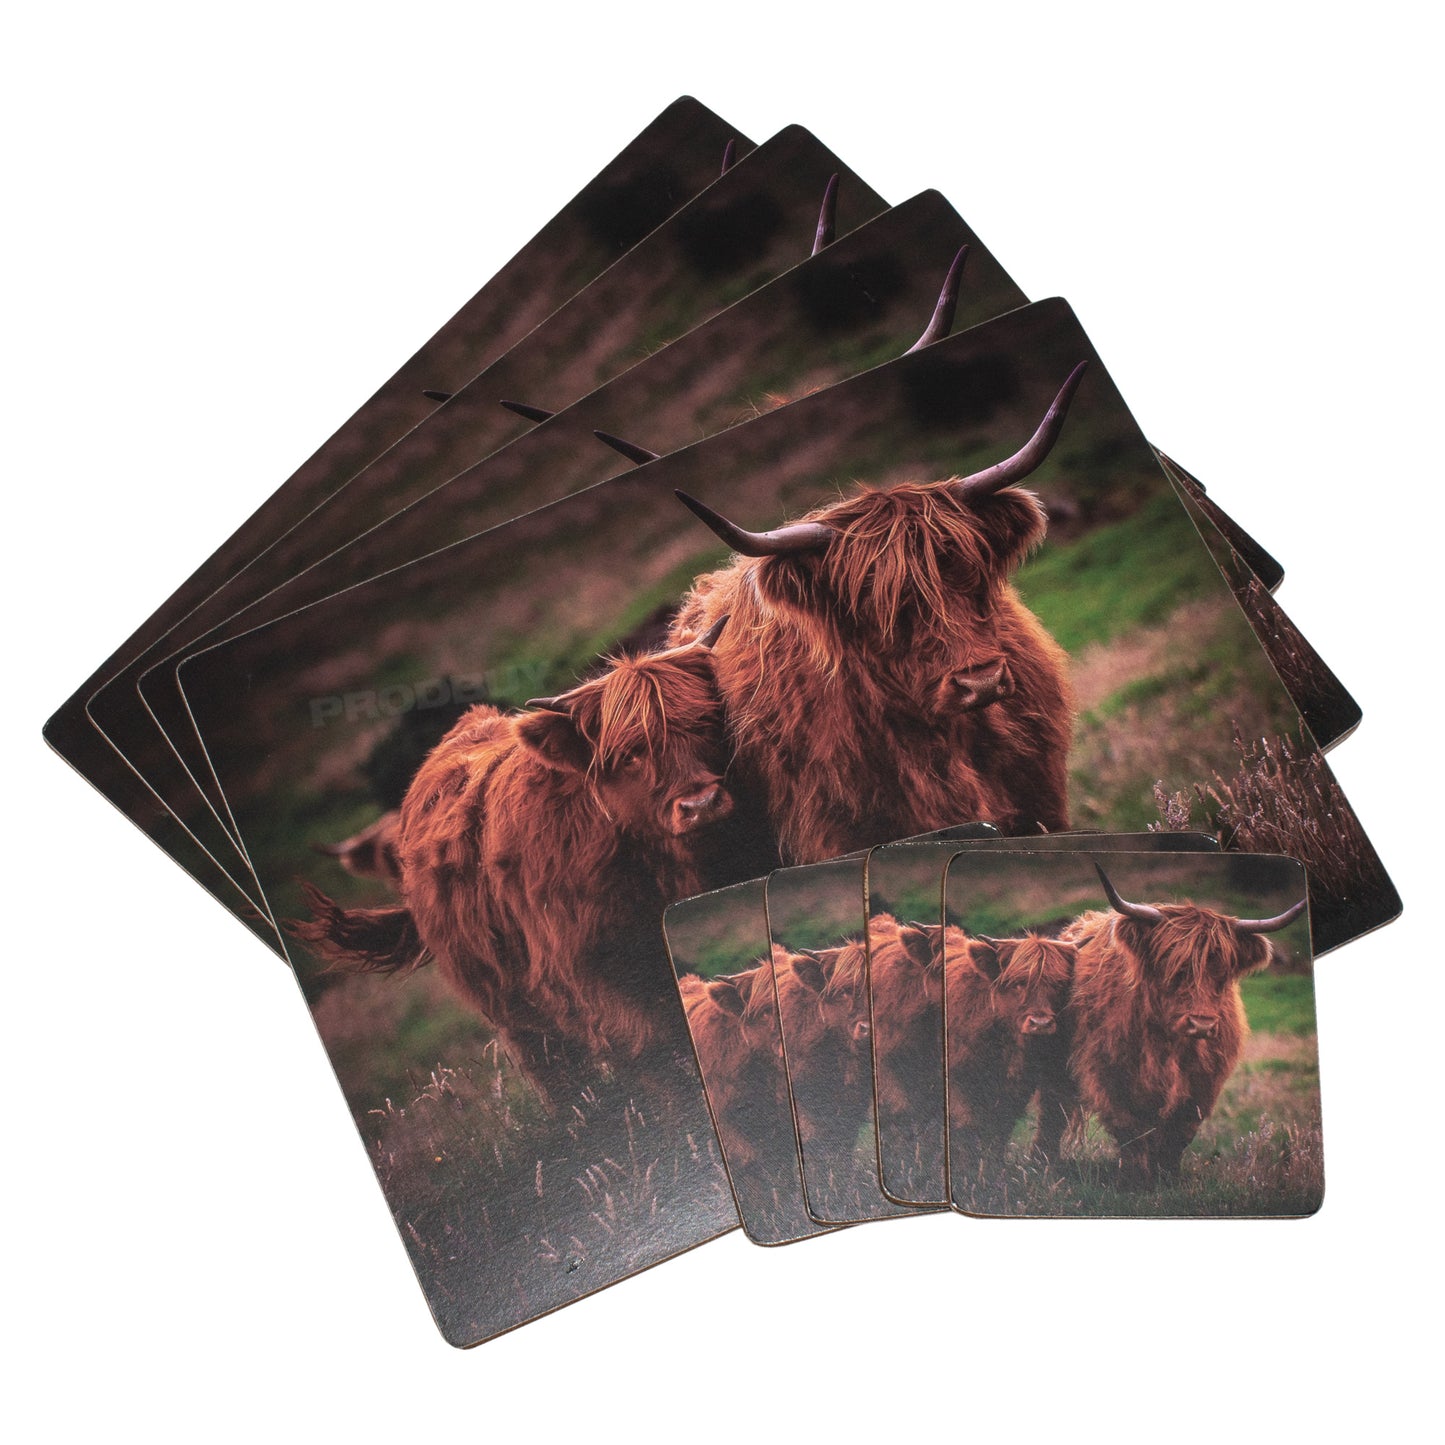 Set of 4 Placemats & 4 Coasters with Highland Cows